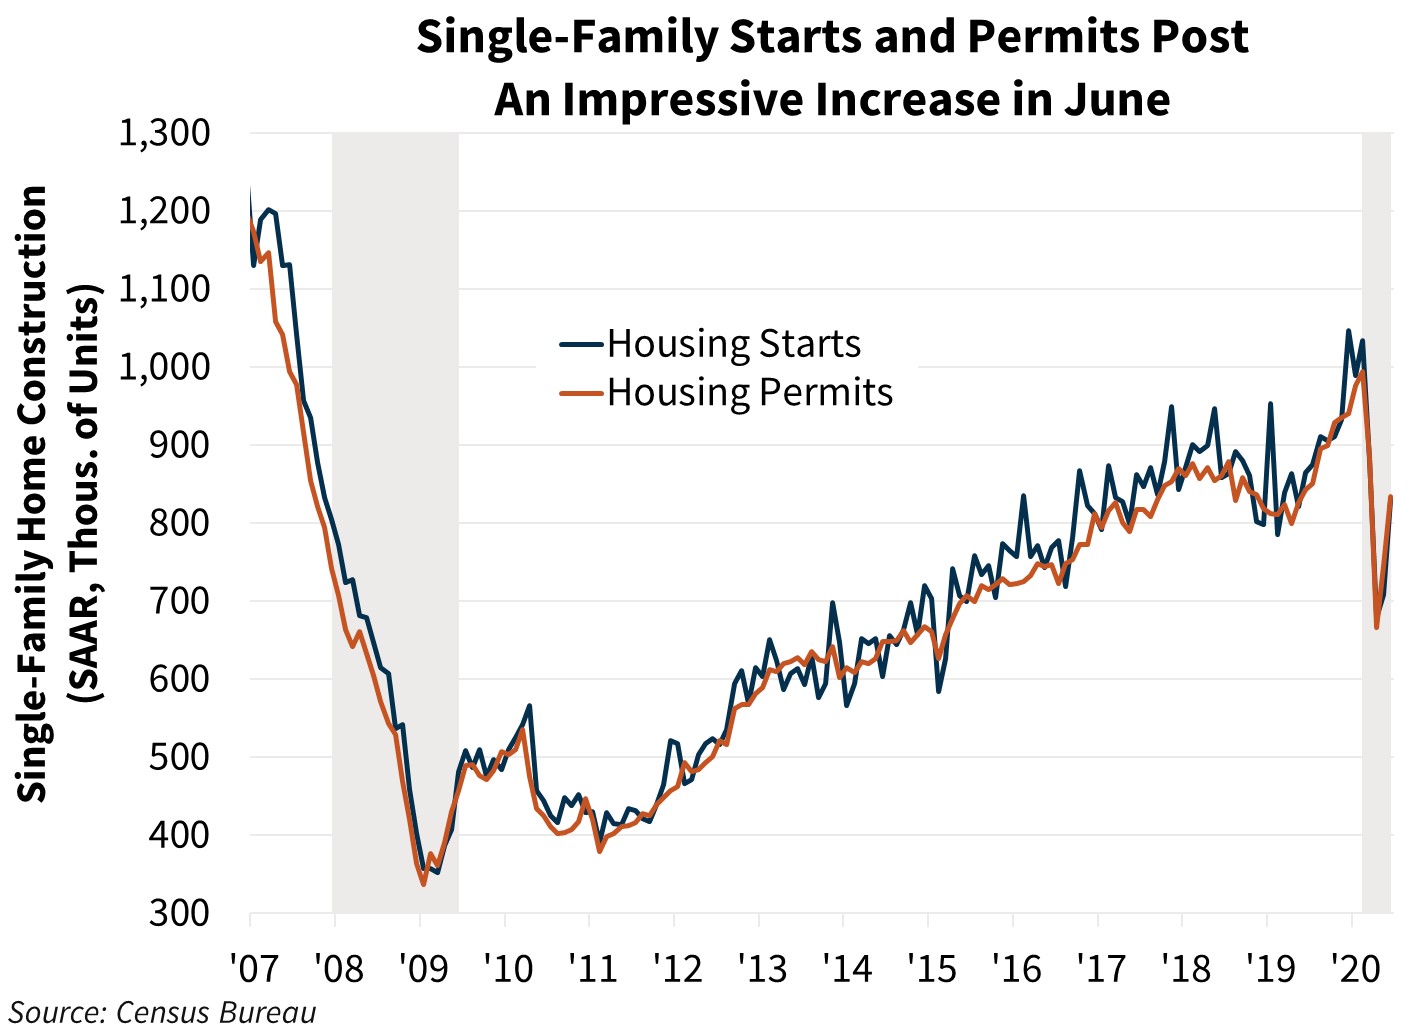  Single-Family Starts and Permits Post An Impressive Increase in June 